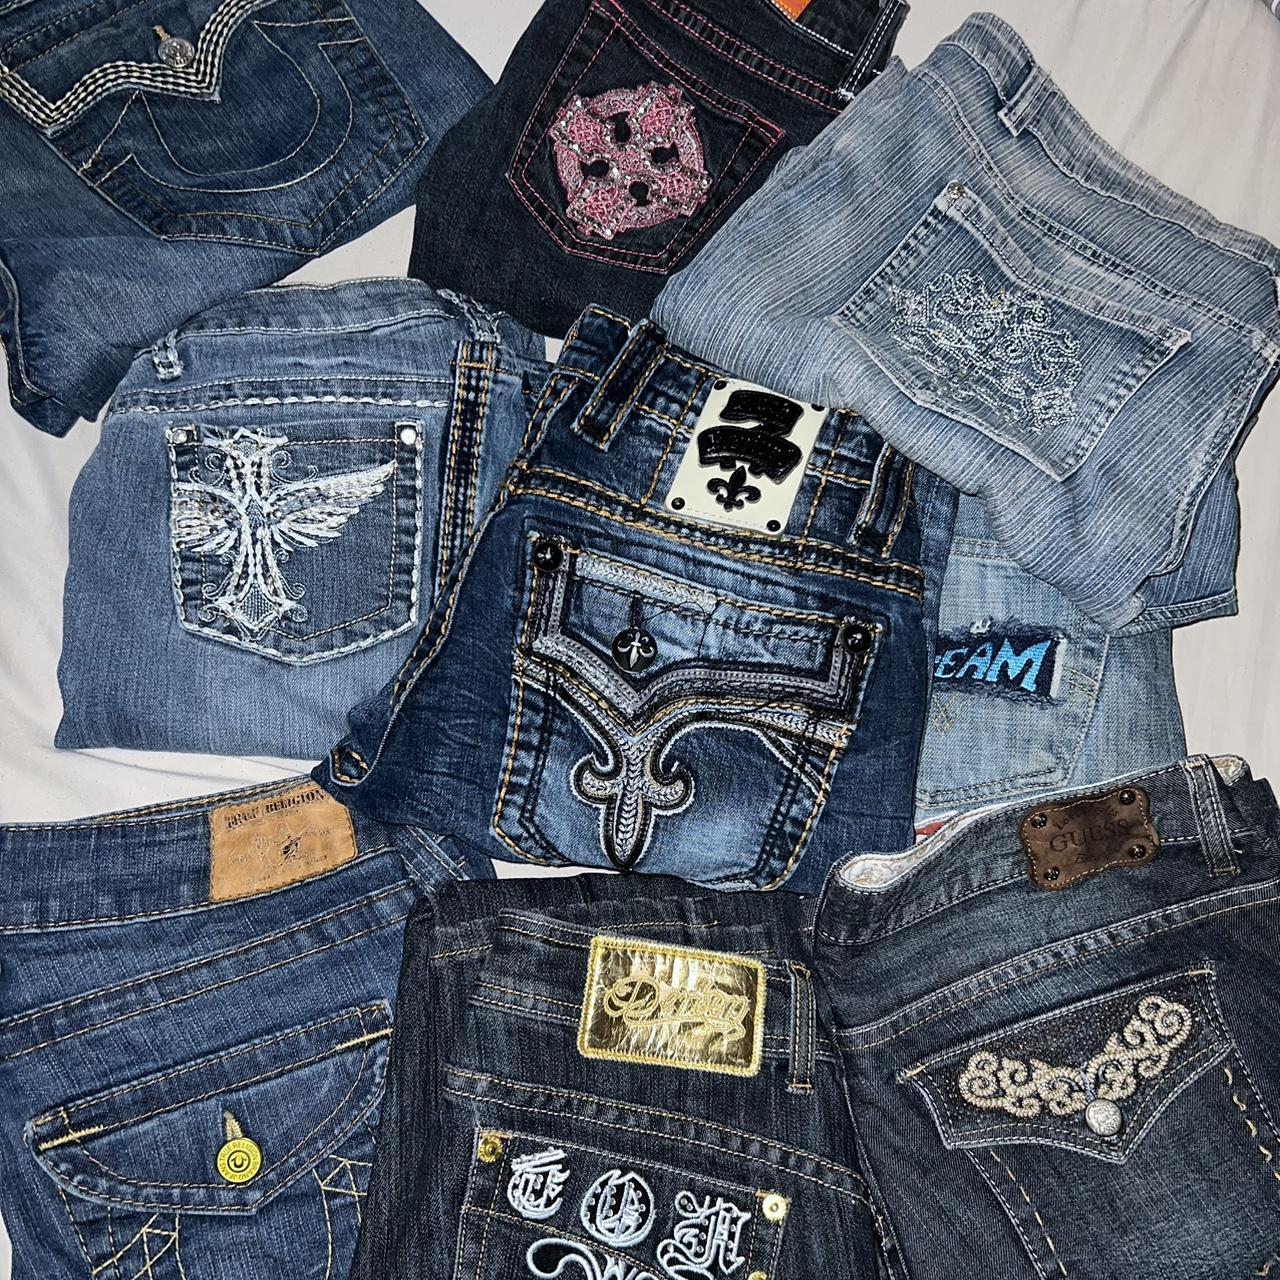 Black Friday Sale!!! Tons of styles of jeans from... - Depop